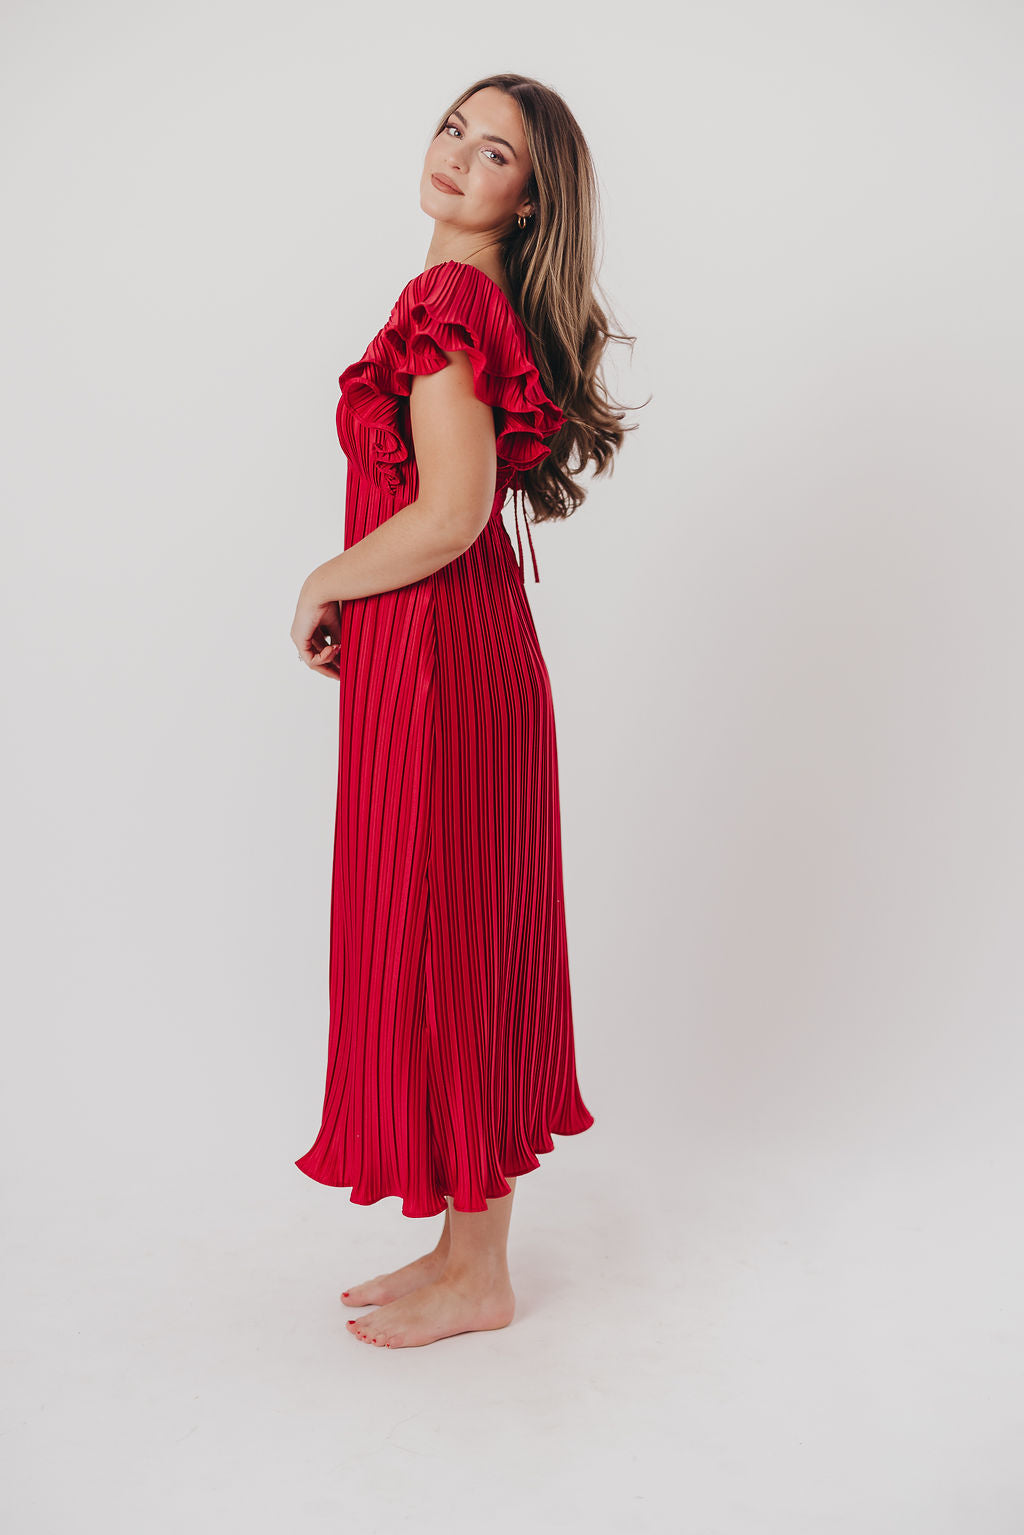 Lucky Charm Midi Dress in Red - Bump Friendly & Inclusive Sizing (S-3XL)